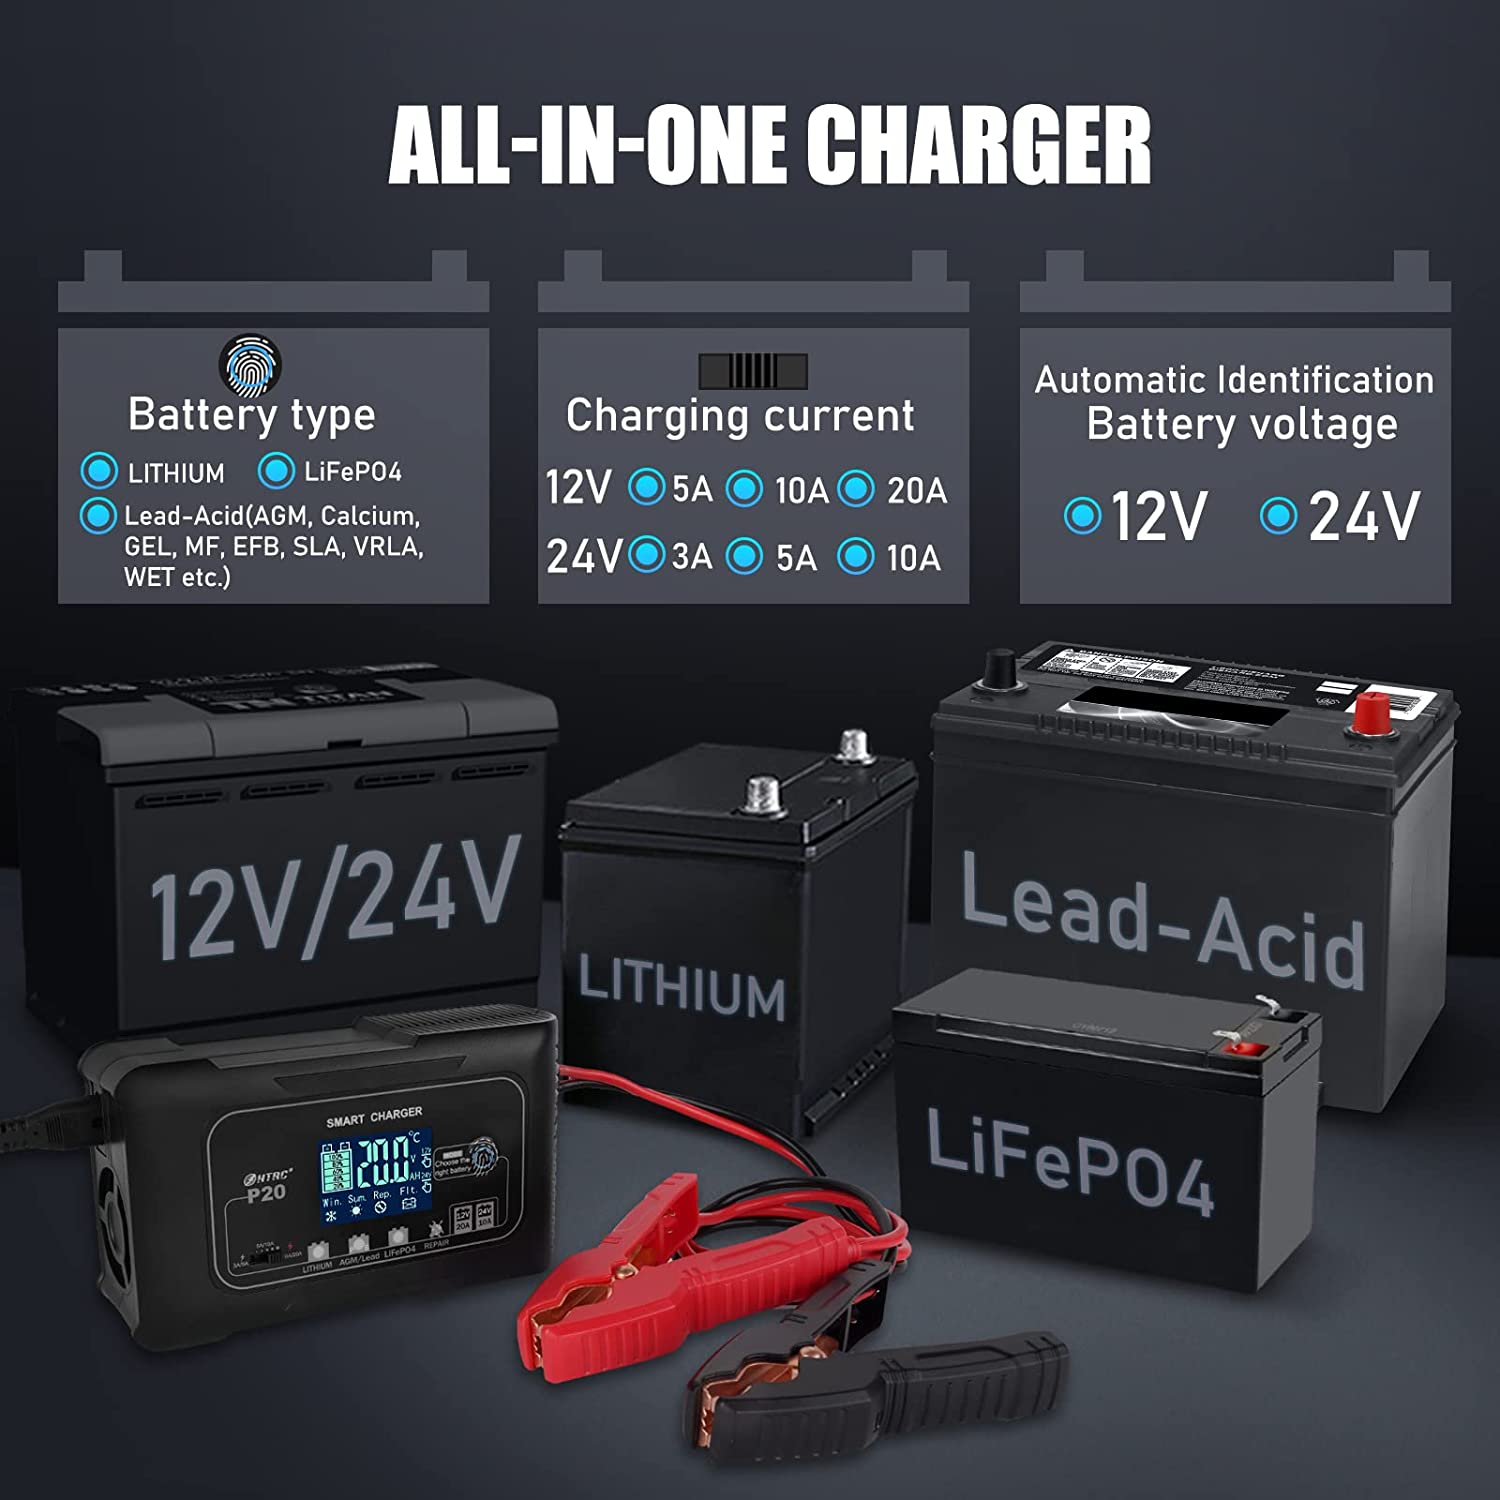 P20 20A Smart Battery Charger,Lithium,LiFePO4,Lead-Acid,Portable Car Battery  Cha